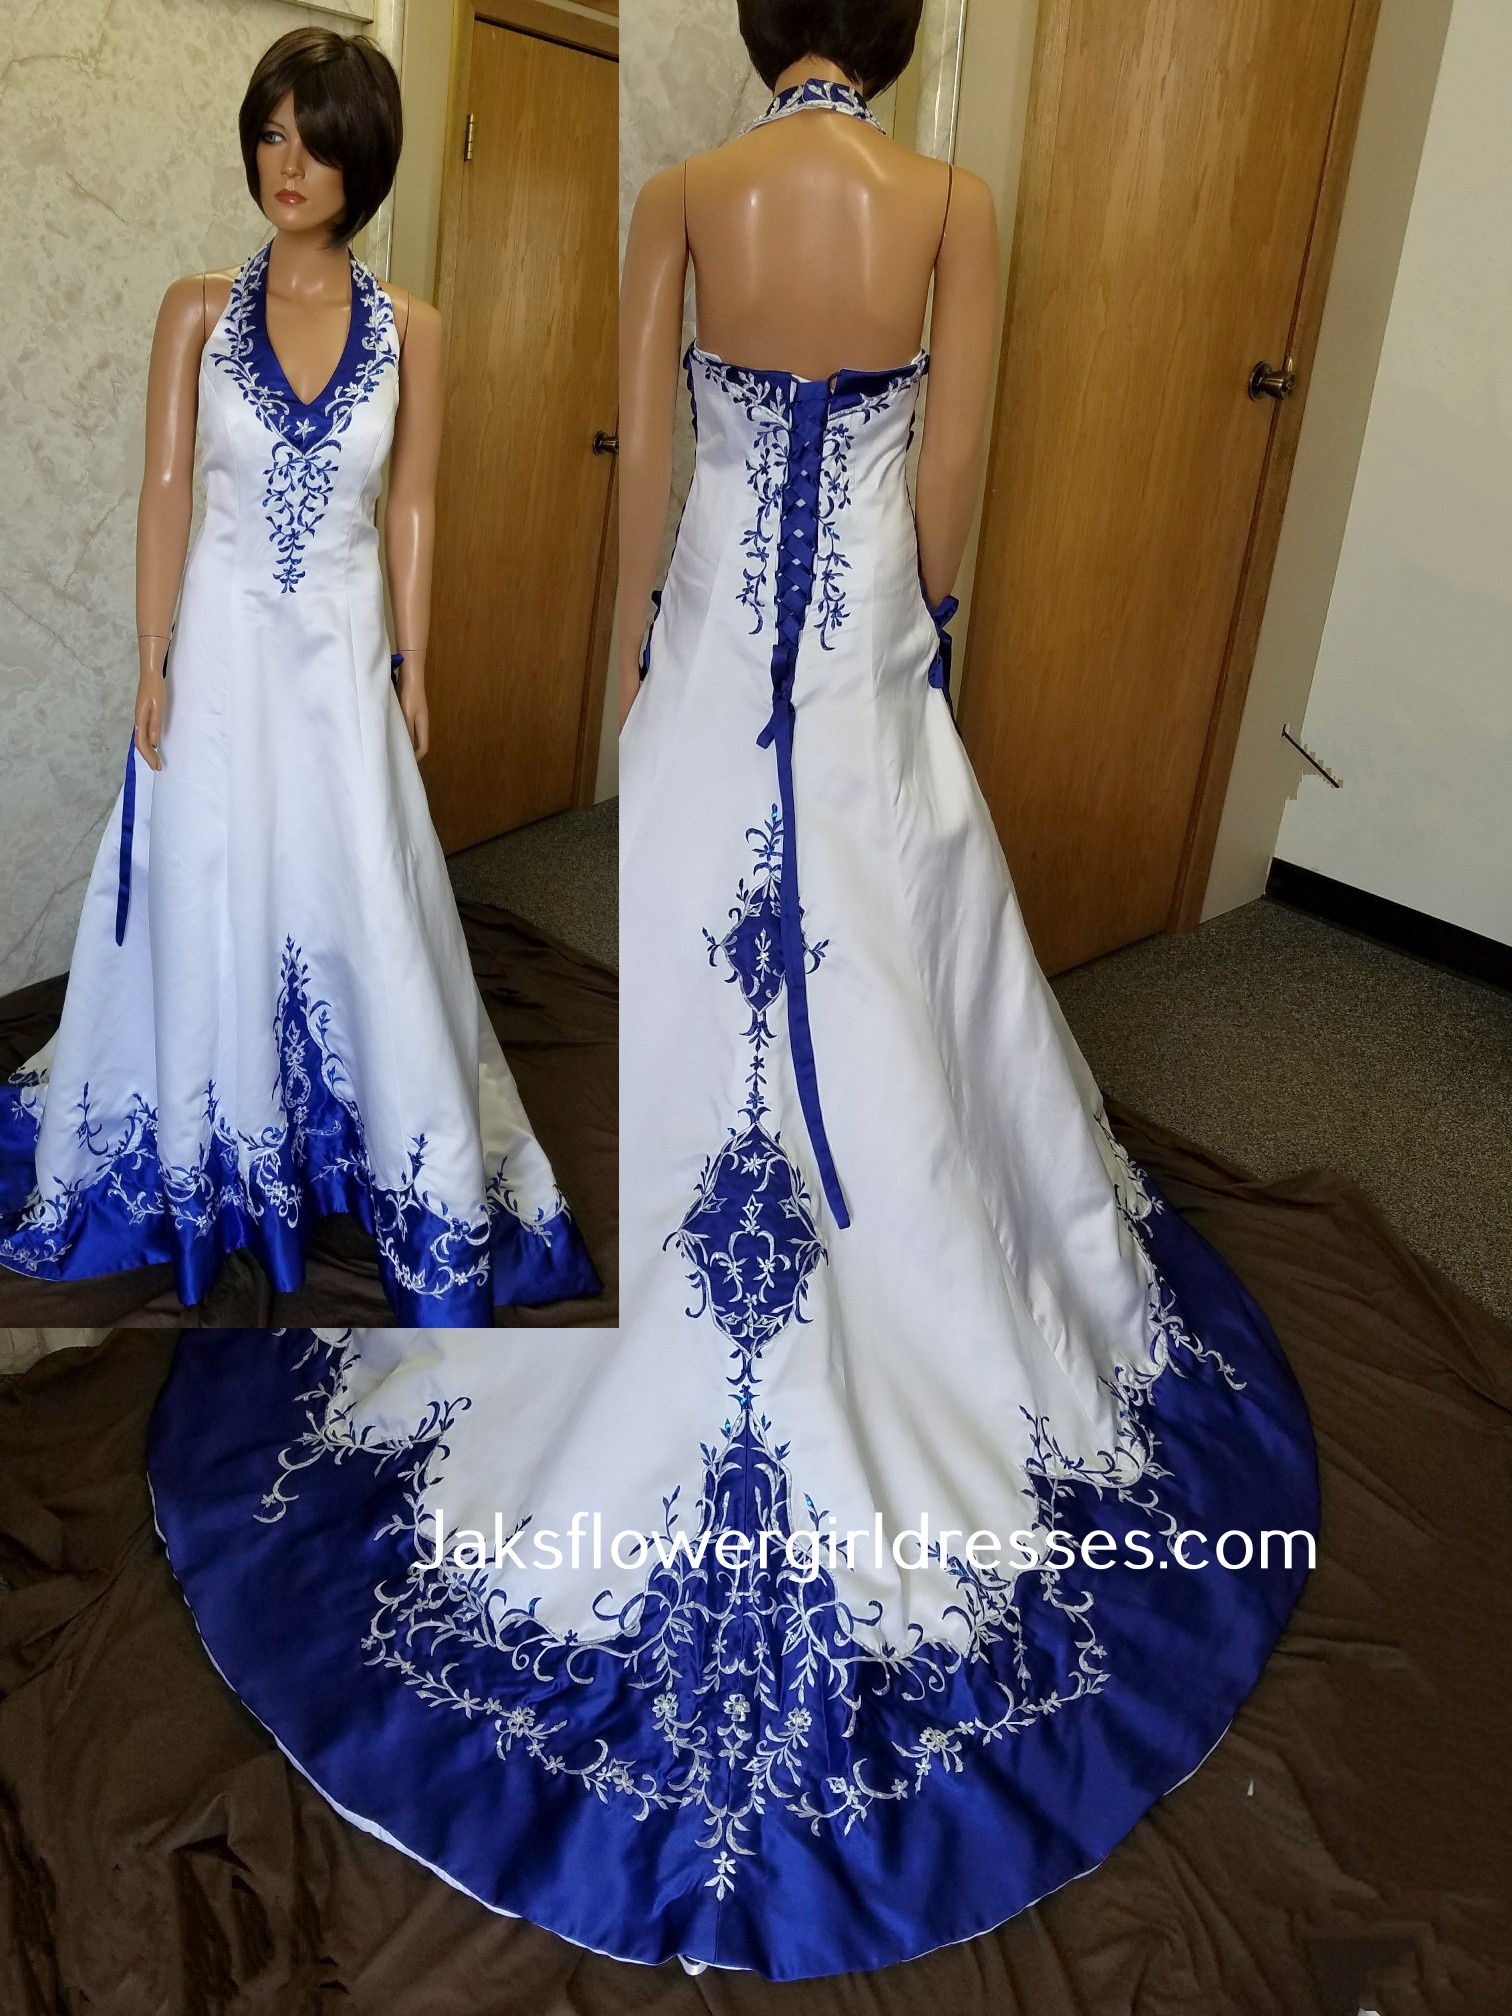 Looking for a bridal gown in a non-traditional color or with a touch of color?  White wedding dresses with color accents and color accents bridal gowns.